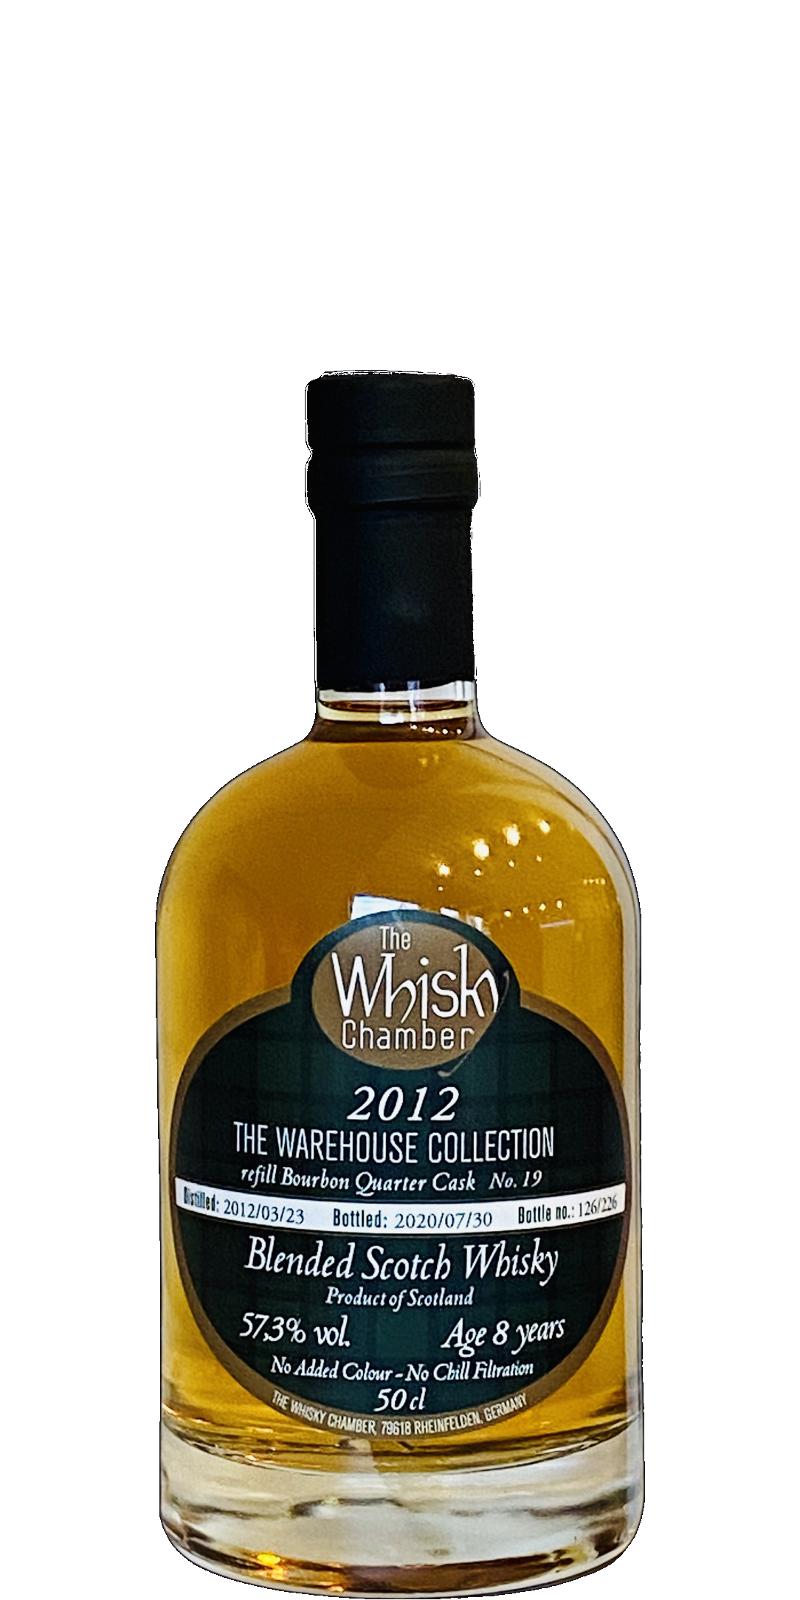 Blended Scotch Whisky 2012 WCh